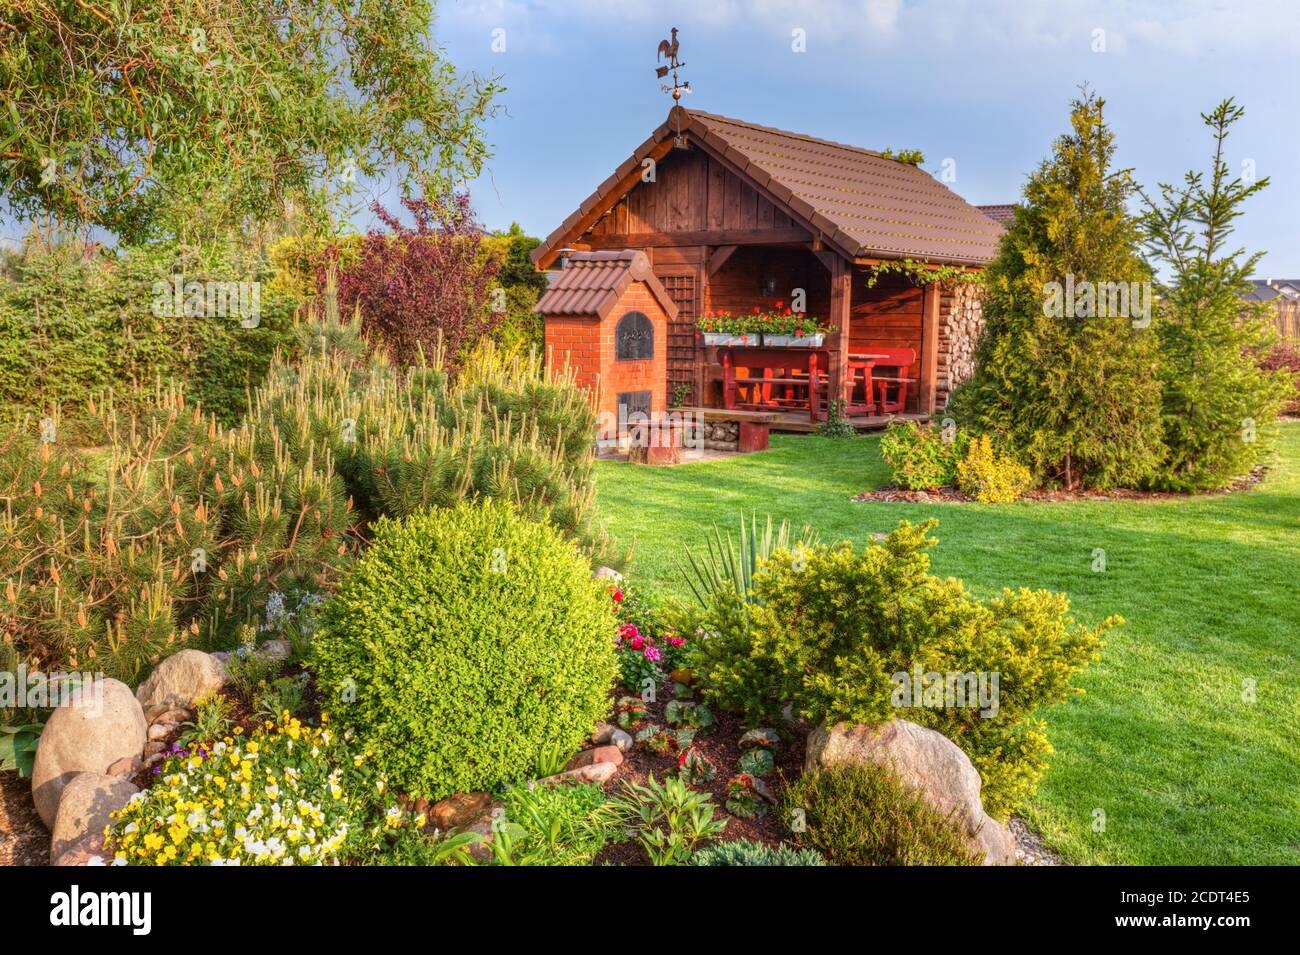 Landscaped summer garden with barbecue and wooden summerhouse Green trees, flowerbeds, Stock Photo